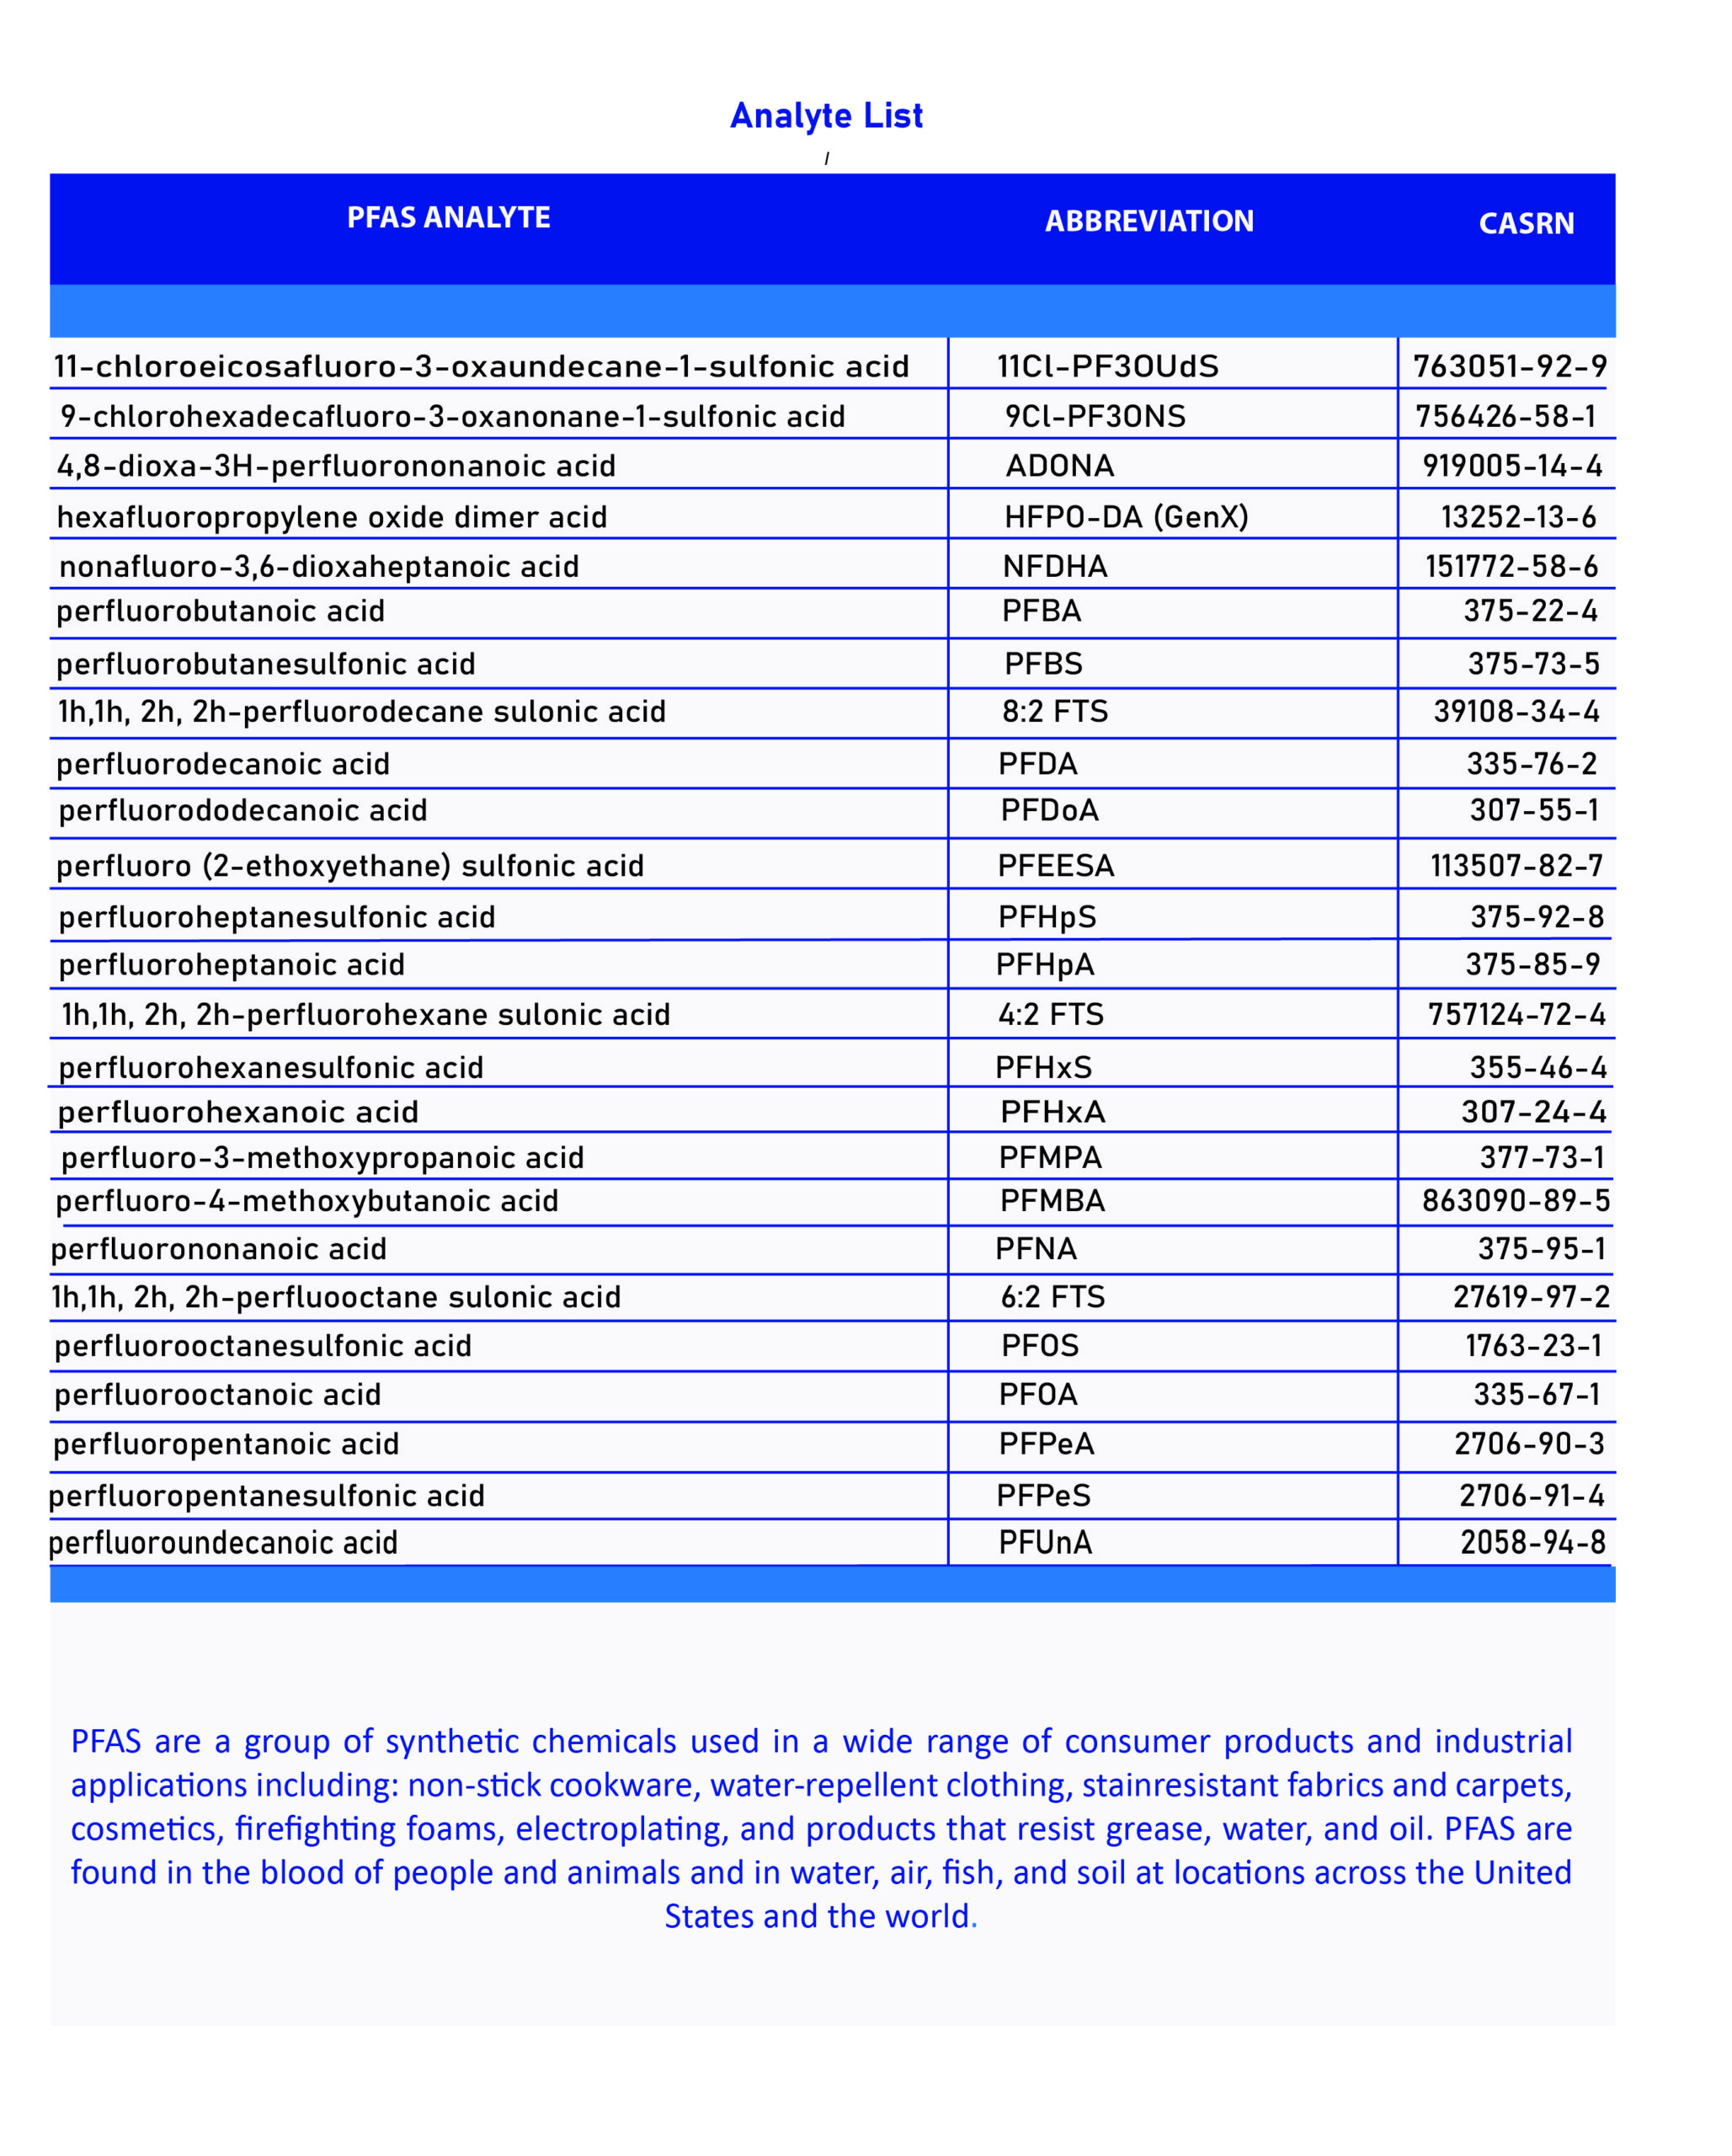 A List of Analytes used in PFAS Testing for Drinking Water.